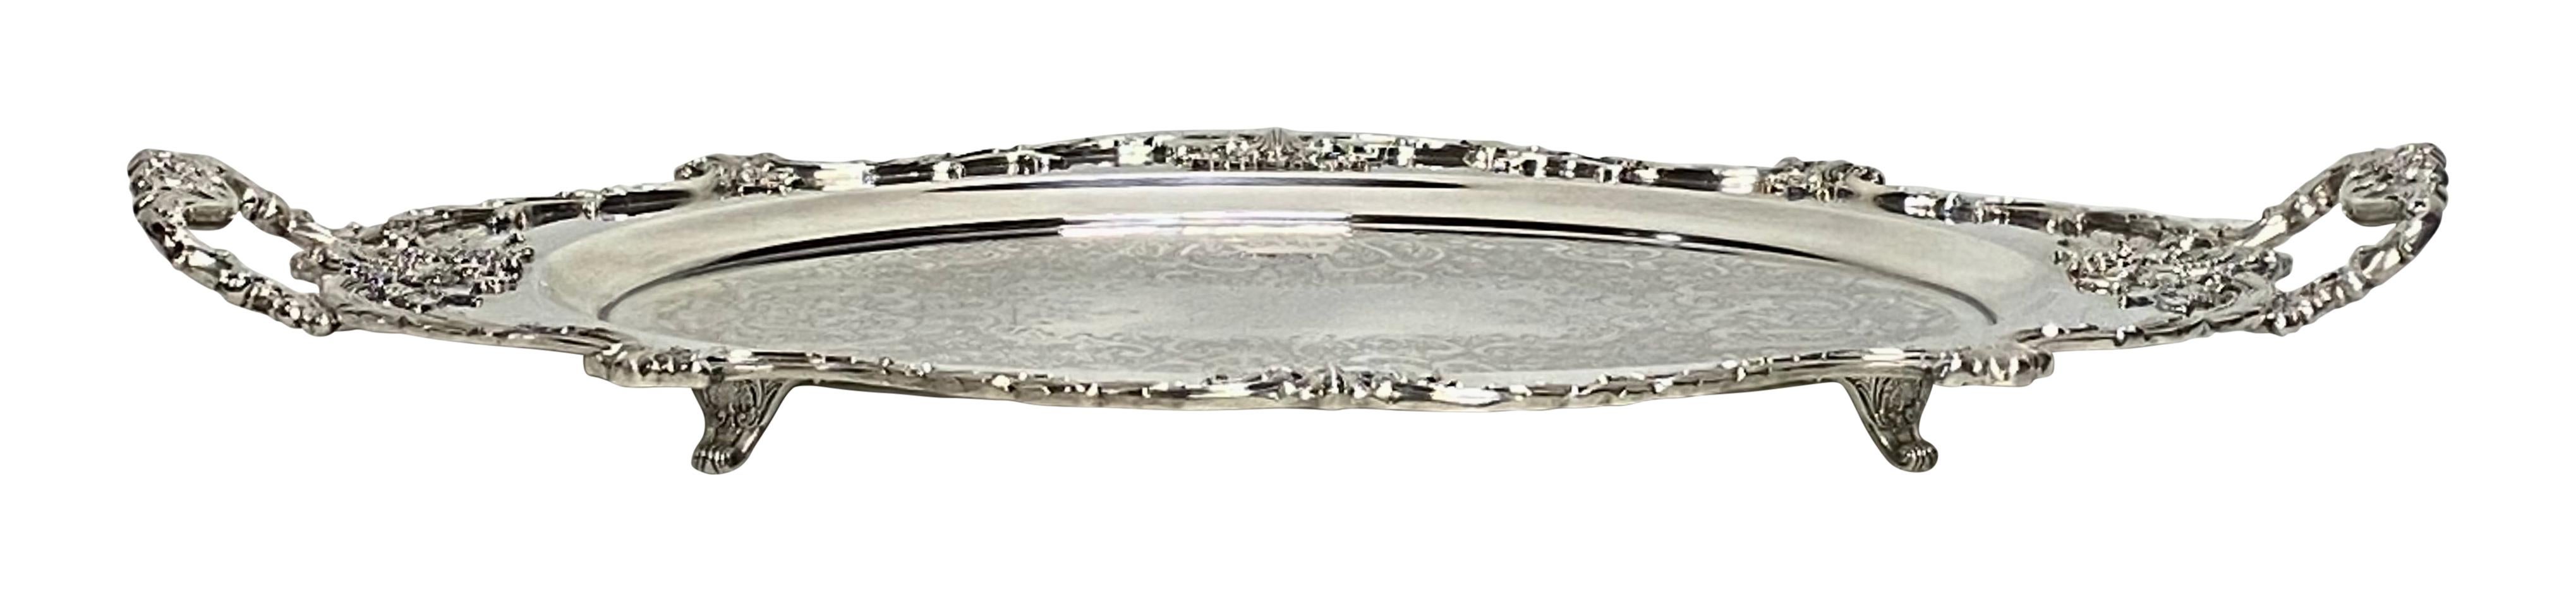 Large Classic Style Wallace Silver Plate Footed Serving Tray 2